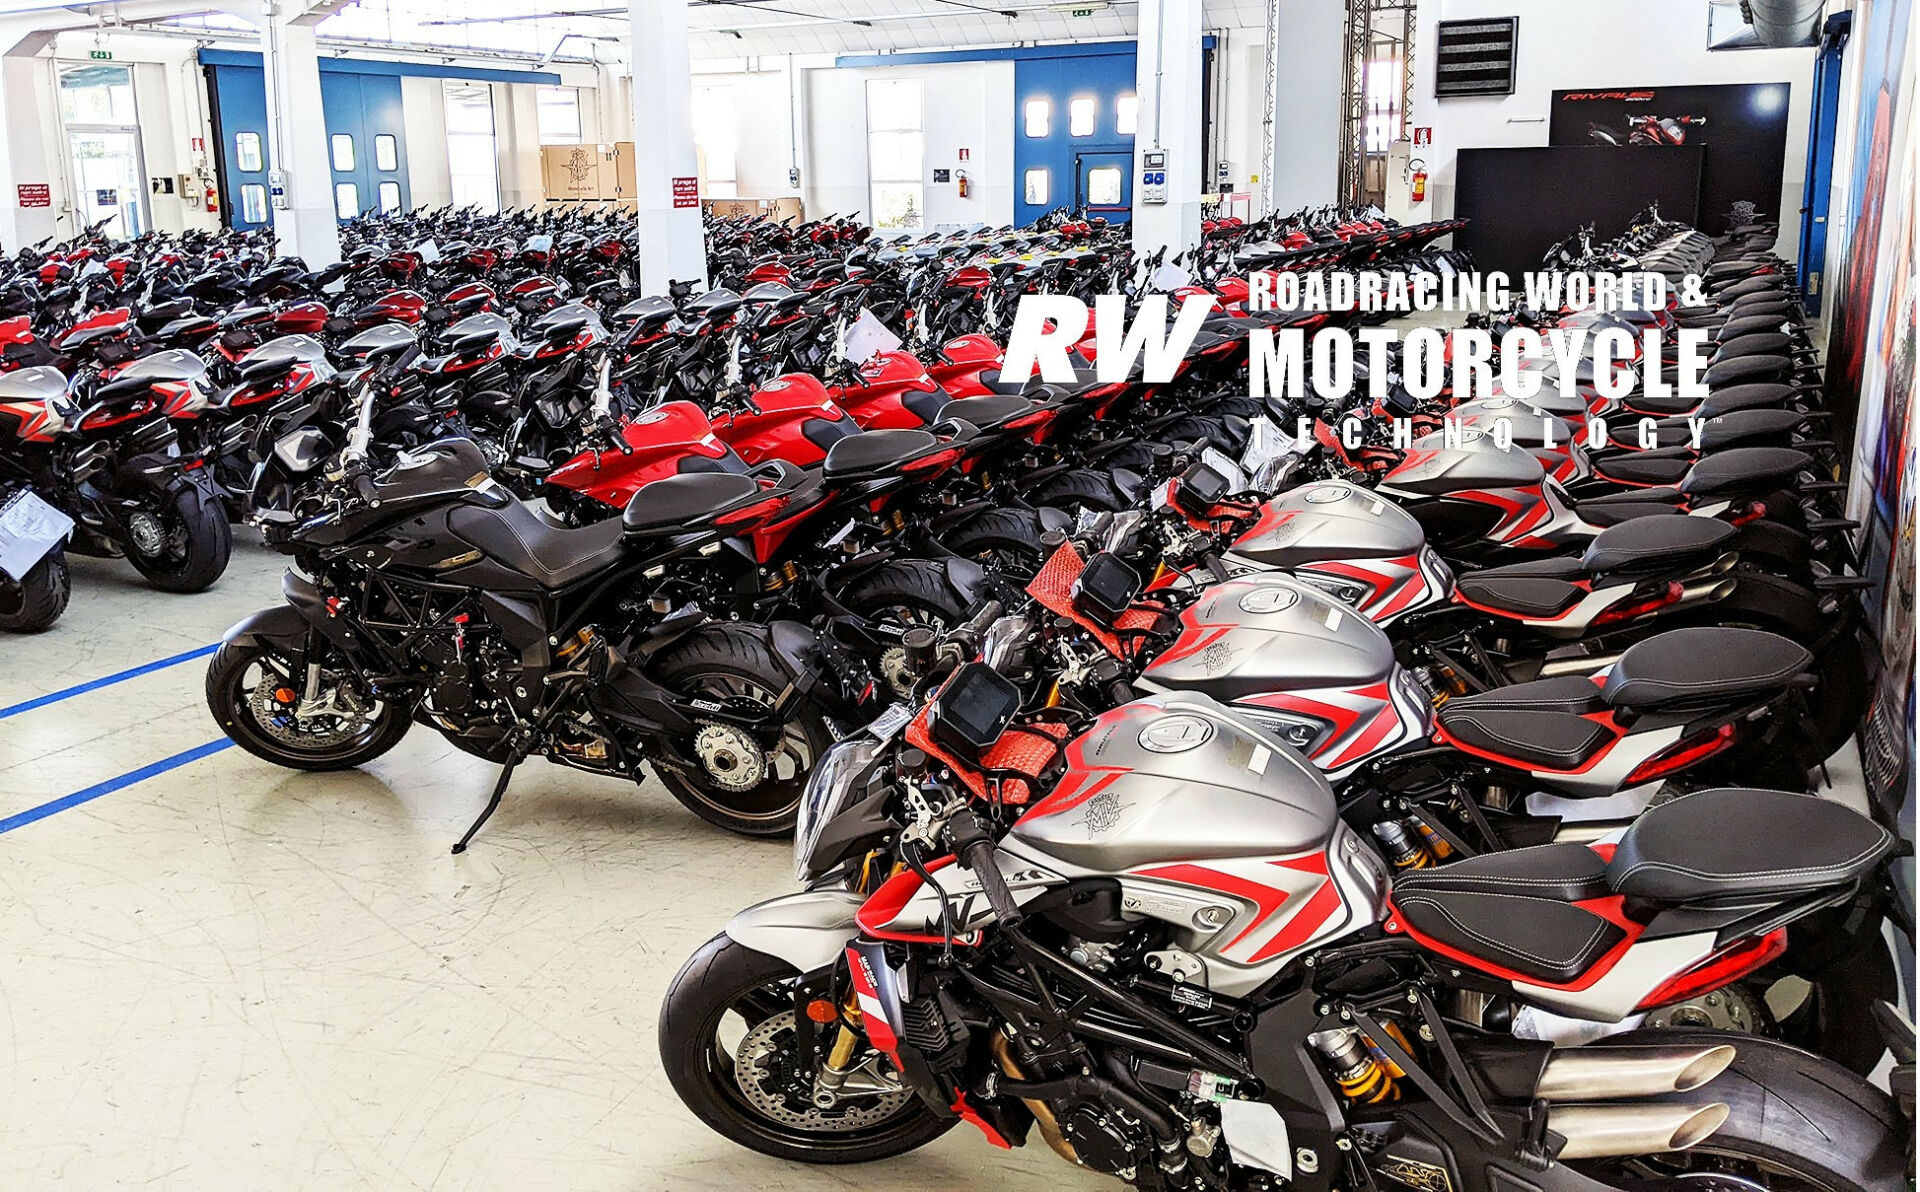 Each MV model has various sub-specifications for specific markets based on regulations for lighting, sound, and emissions. These bikes are already sold and waiting to be crated up and shipped to their final destinations. Photo by Melissa Berkoff.